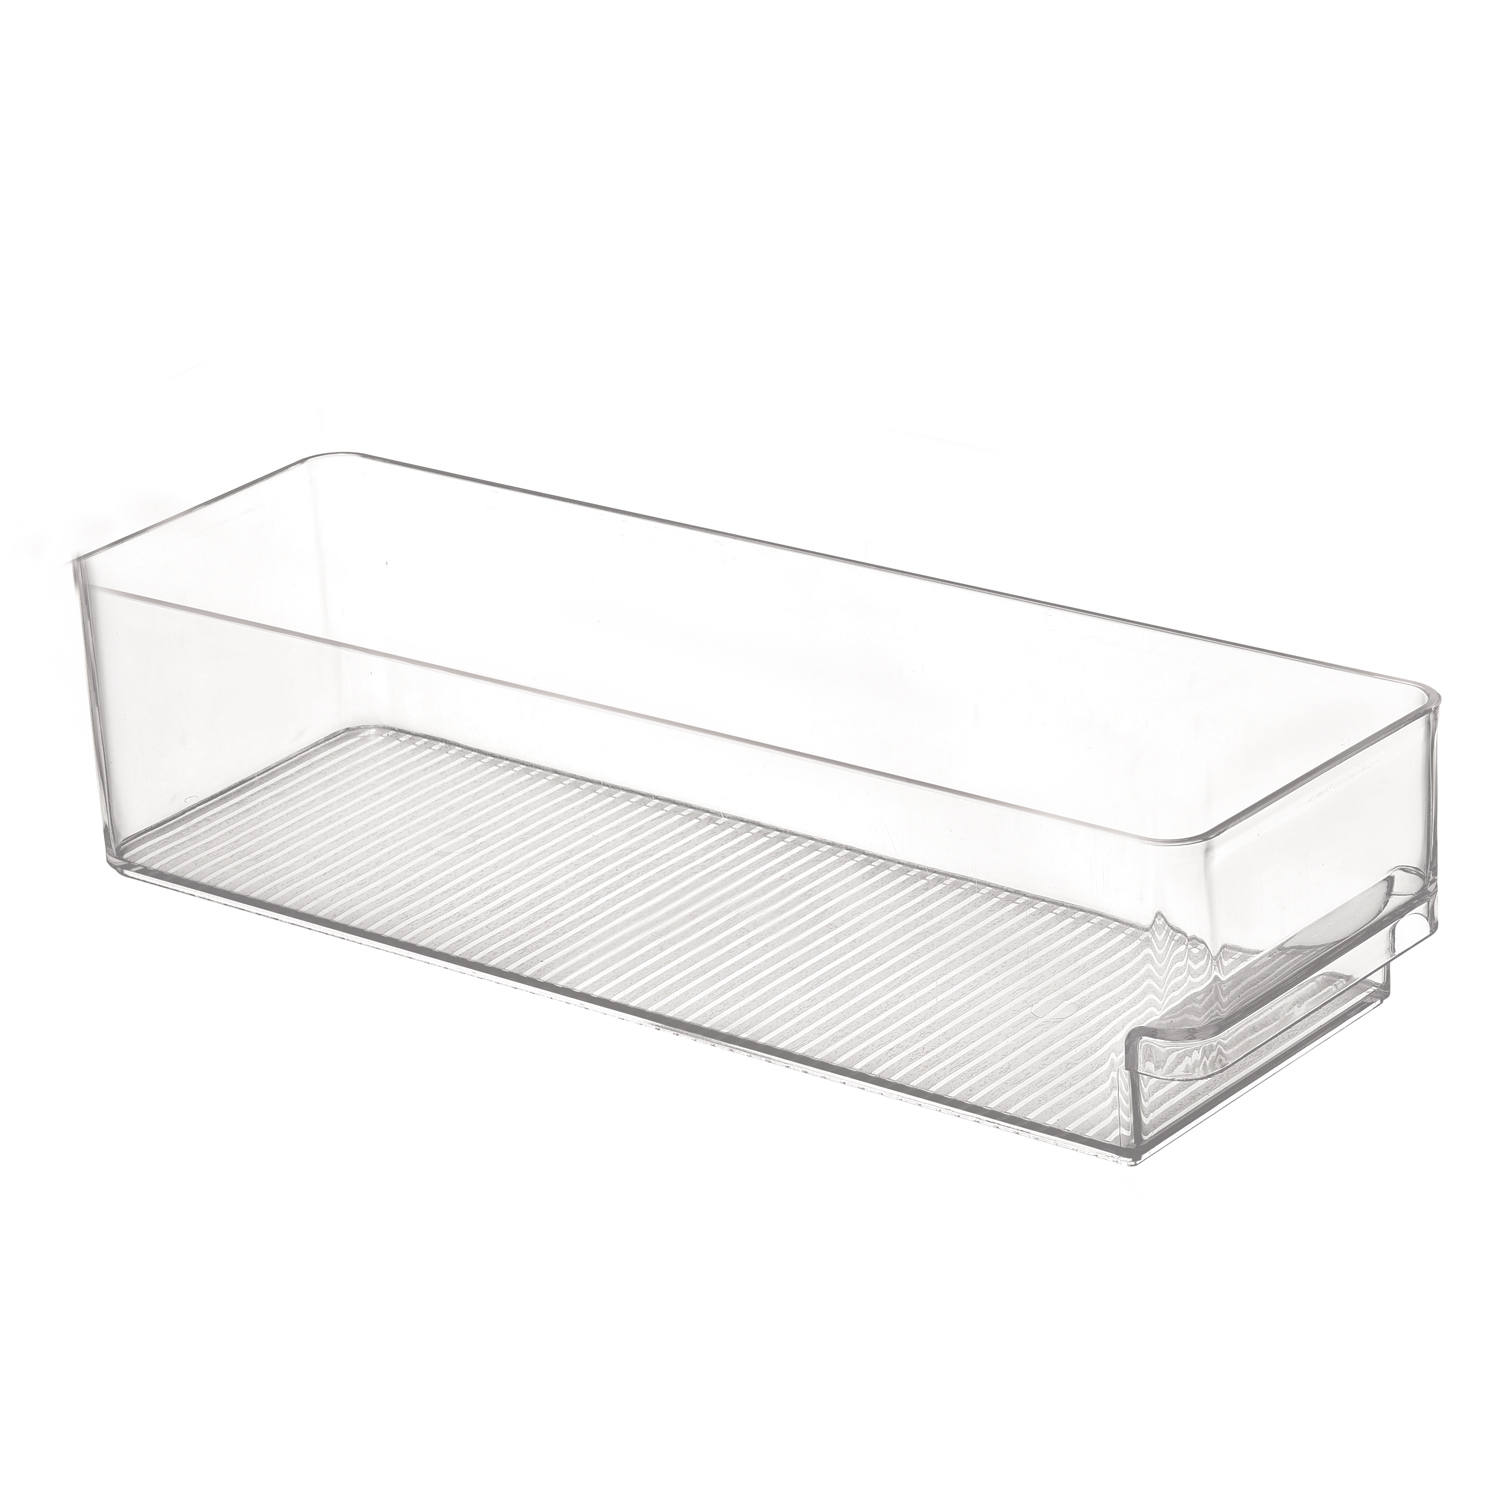 Varina Tray 1 (Clear) - Furniture Source Philippines